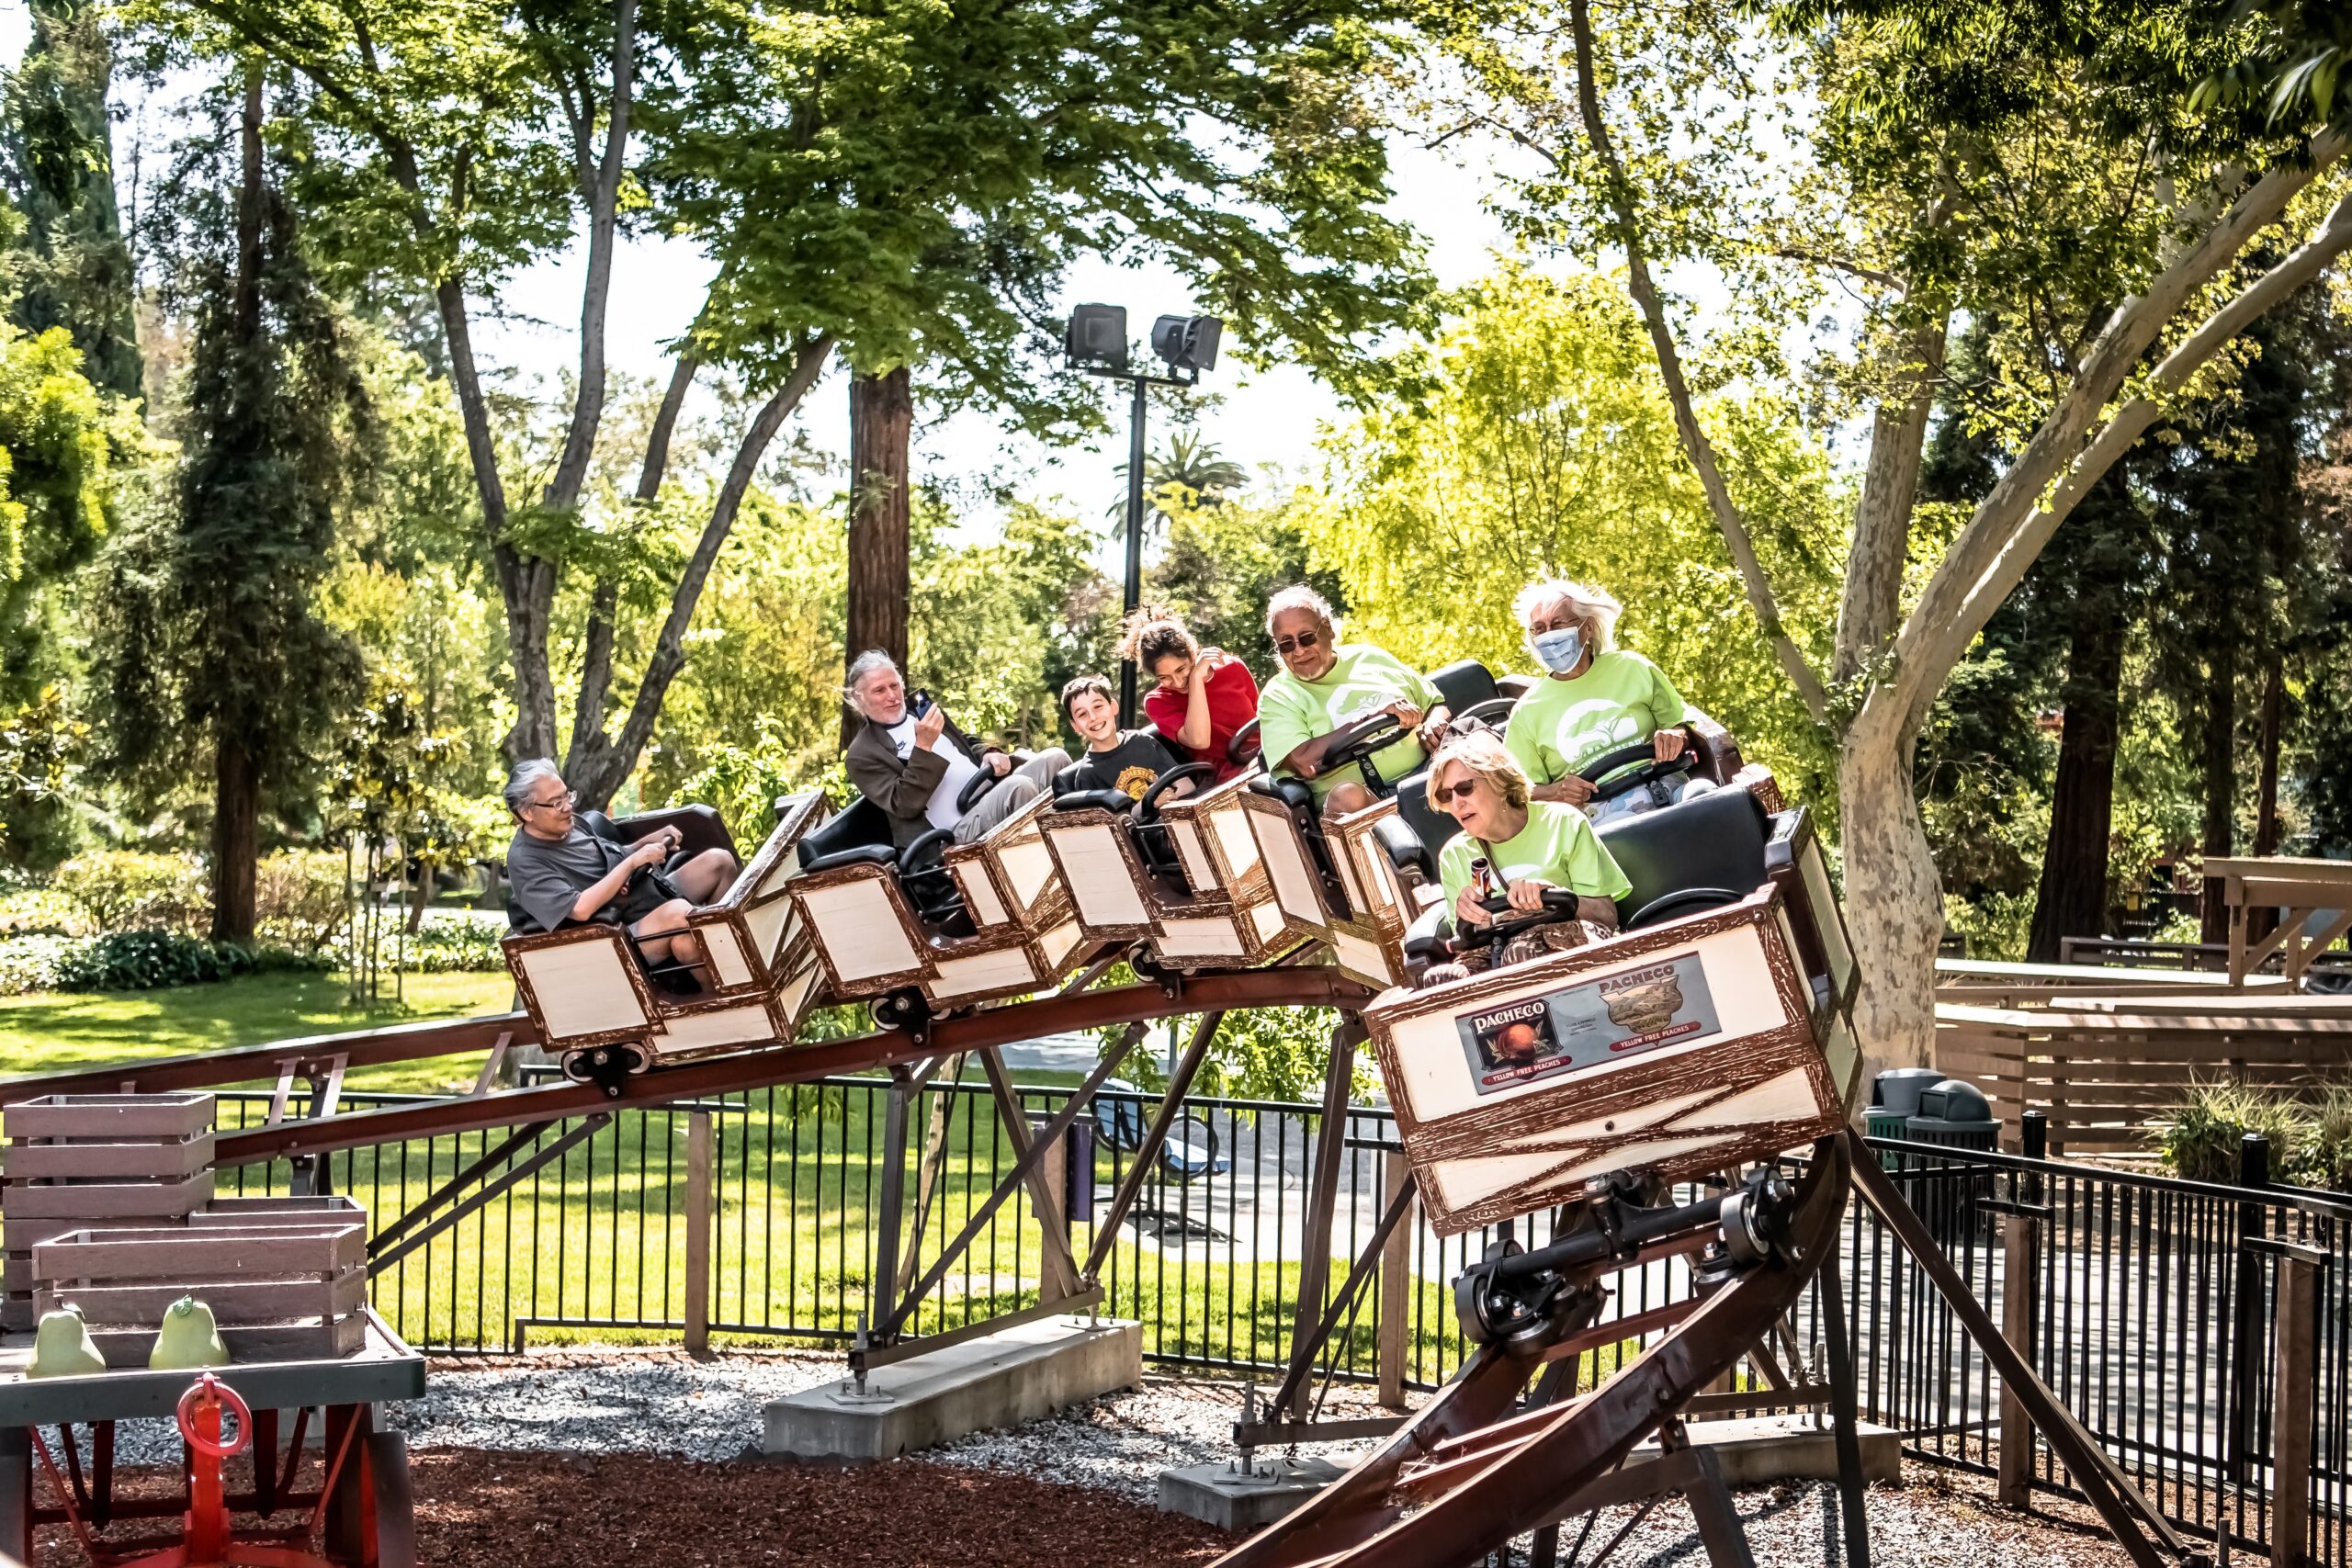 Happy Hollow Park & Zoo – Connecting people and nature through the joy of PLAY